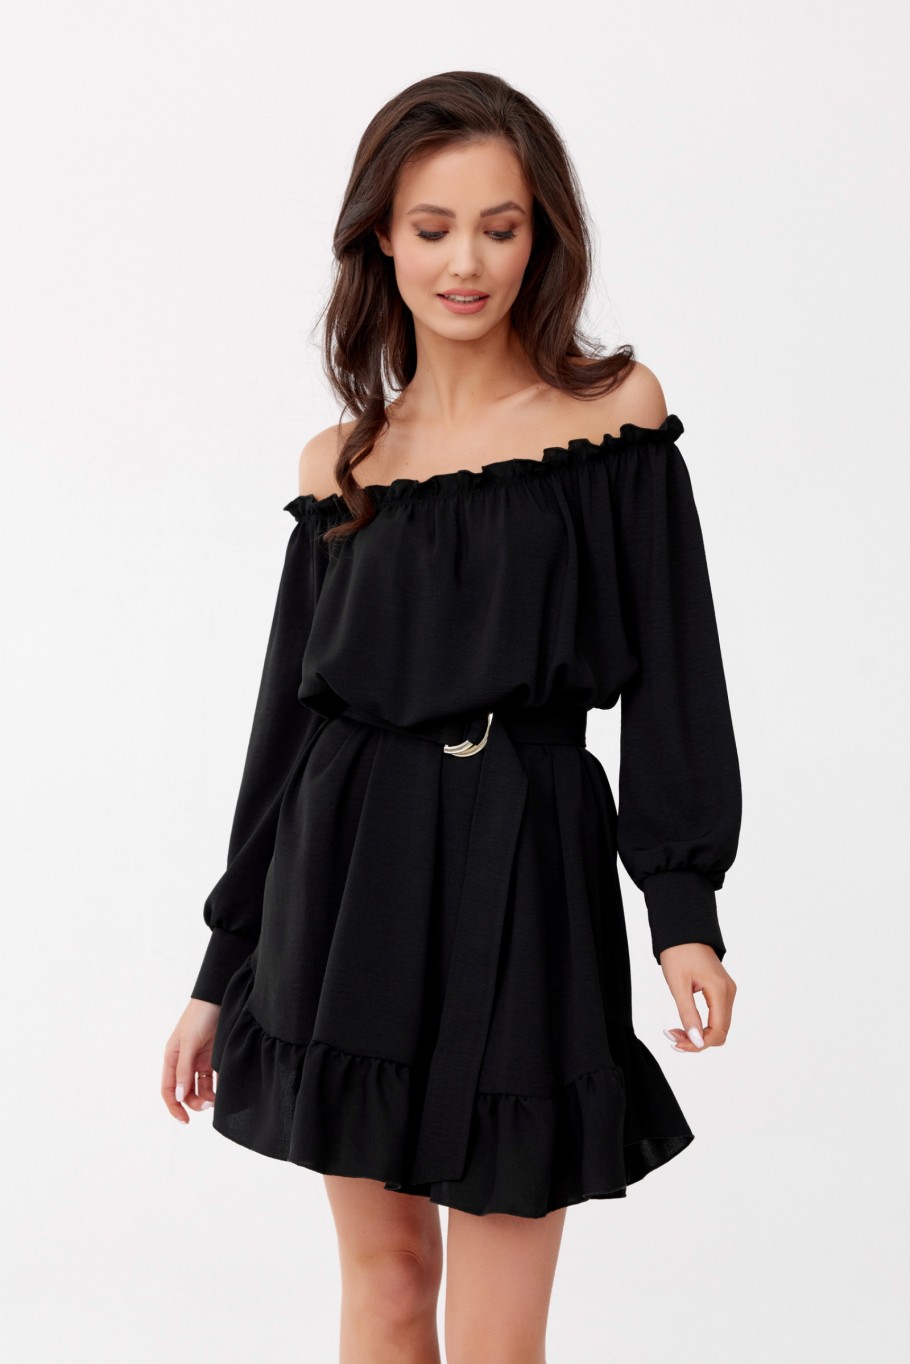 Cindy - off-the-shoulder dress with ruffles and adjustable belt CZA